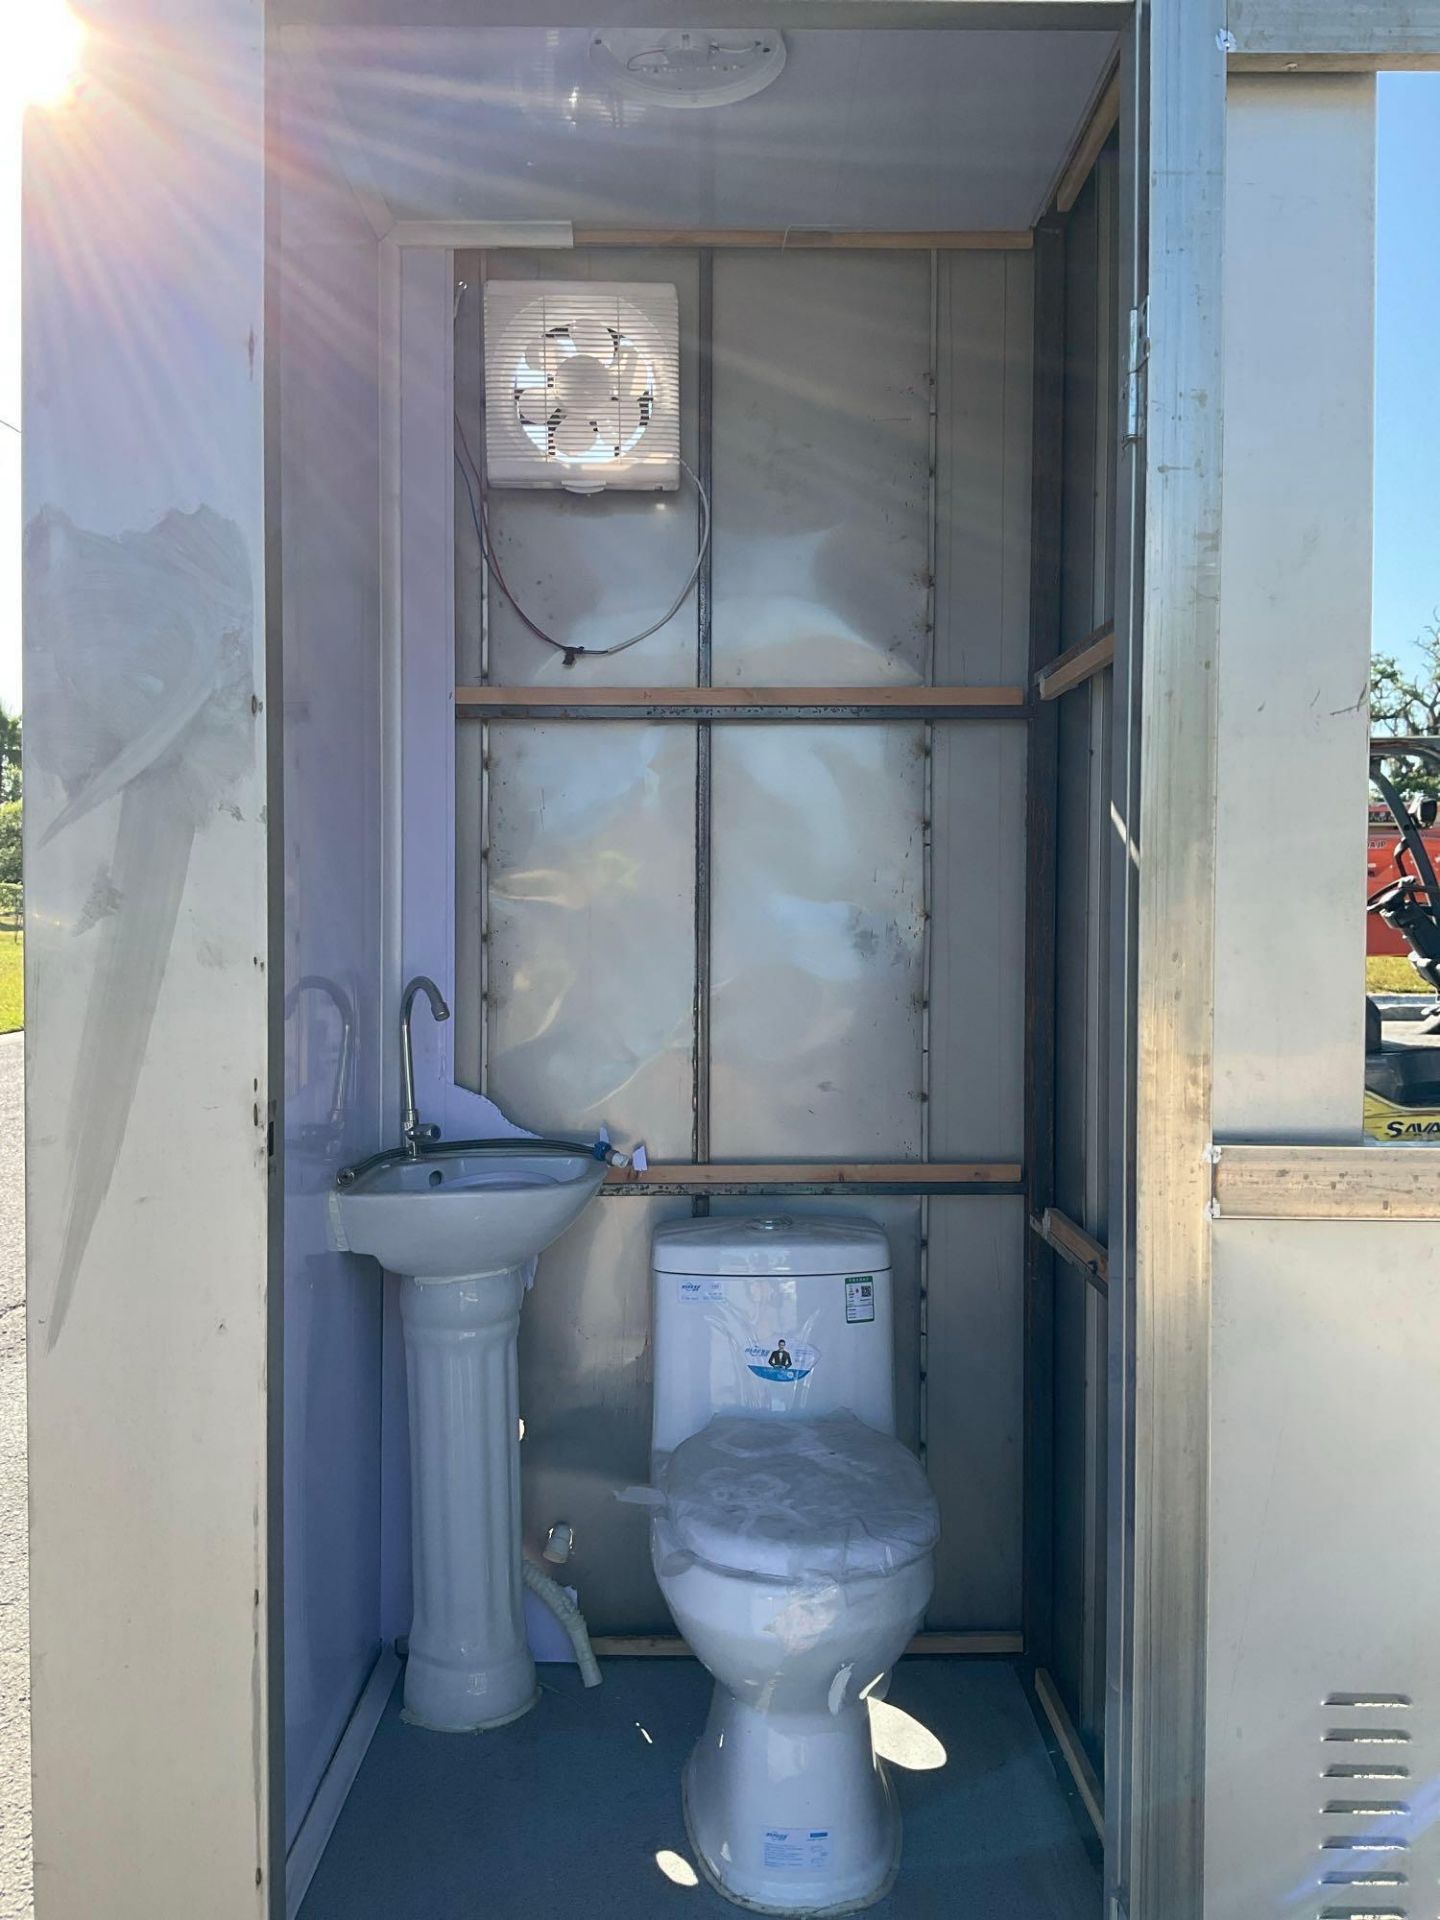 UNUSED STAINLESS STEEL PORTABLE TOILET UNIT,... ELECTRIC & PLUMBING HOOK UP WITH EXTERIOR PLUMBING - Image 6 of 6